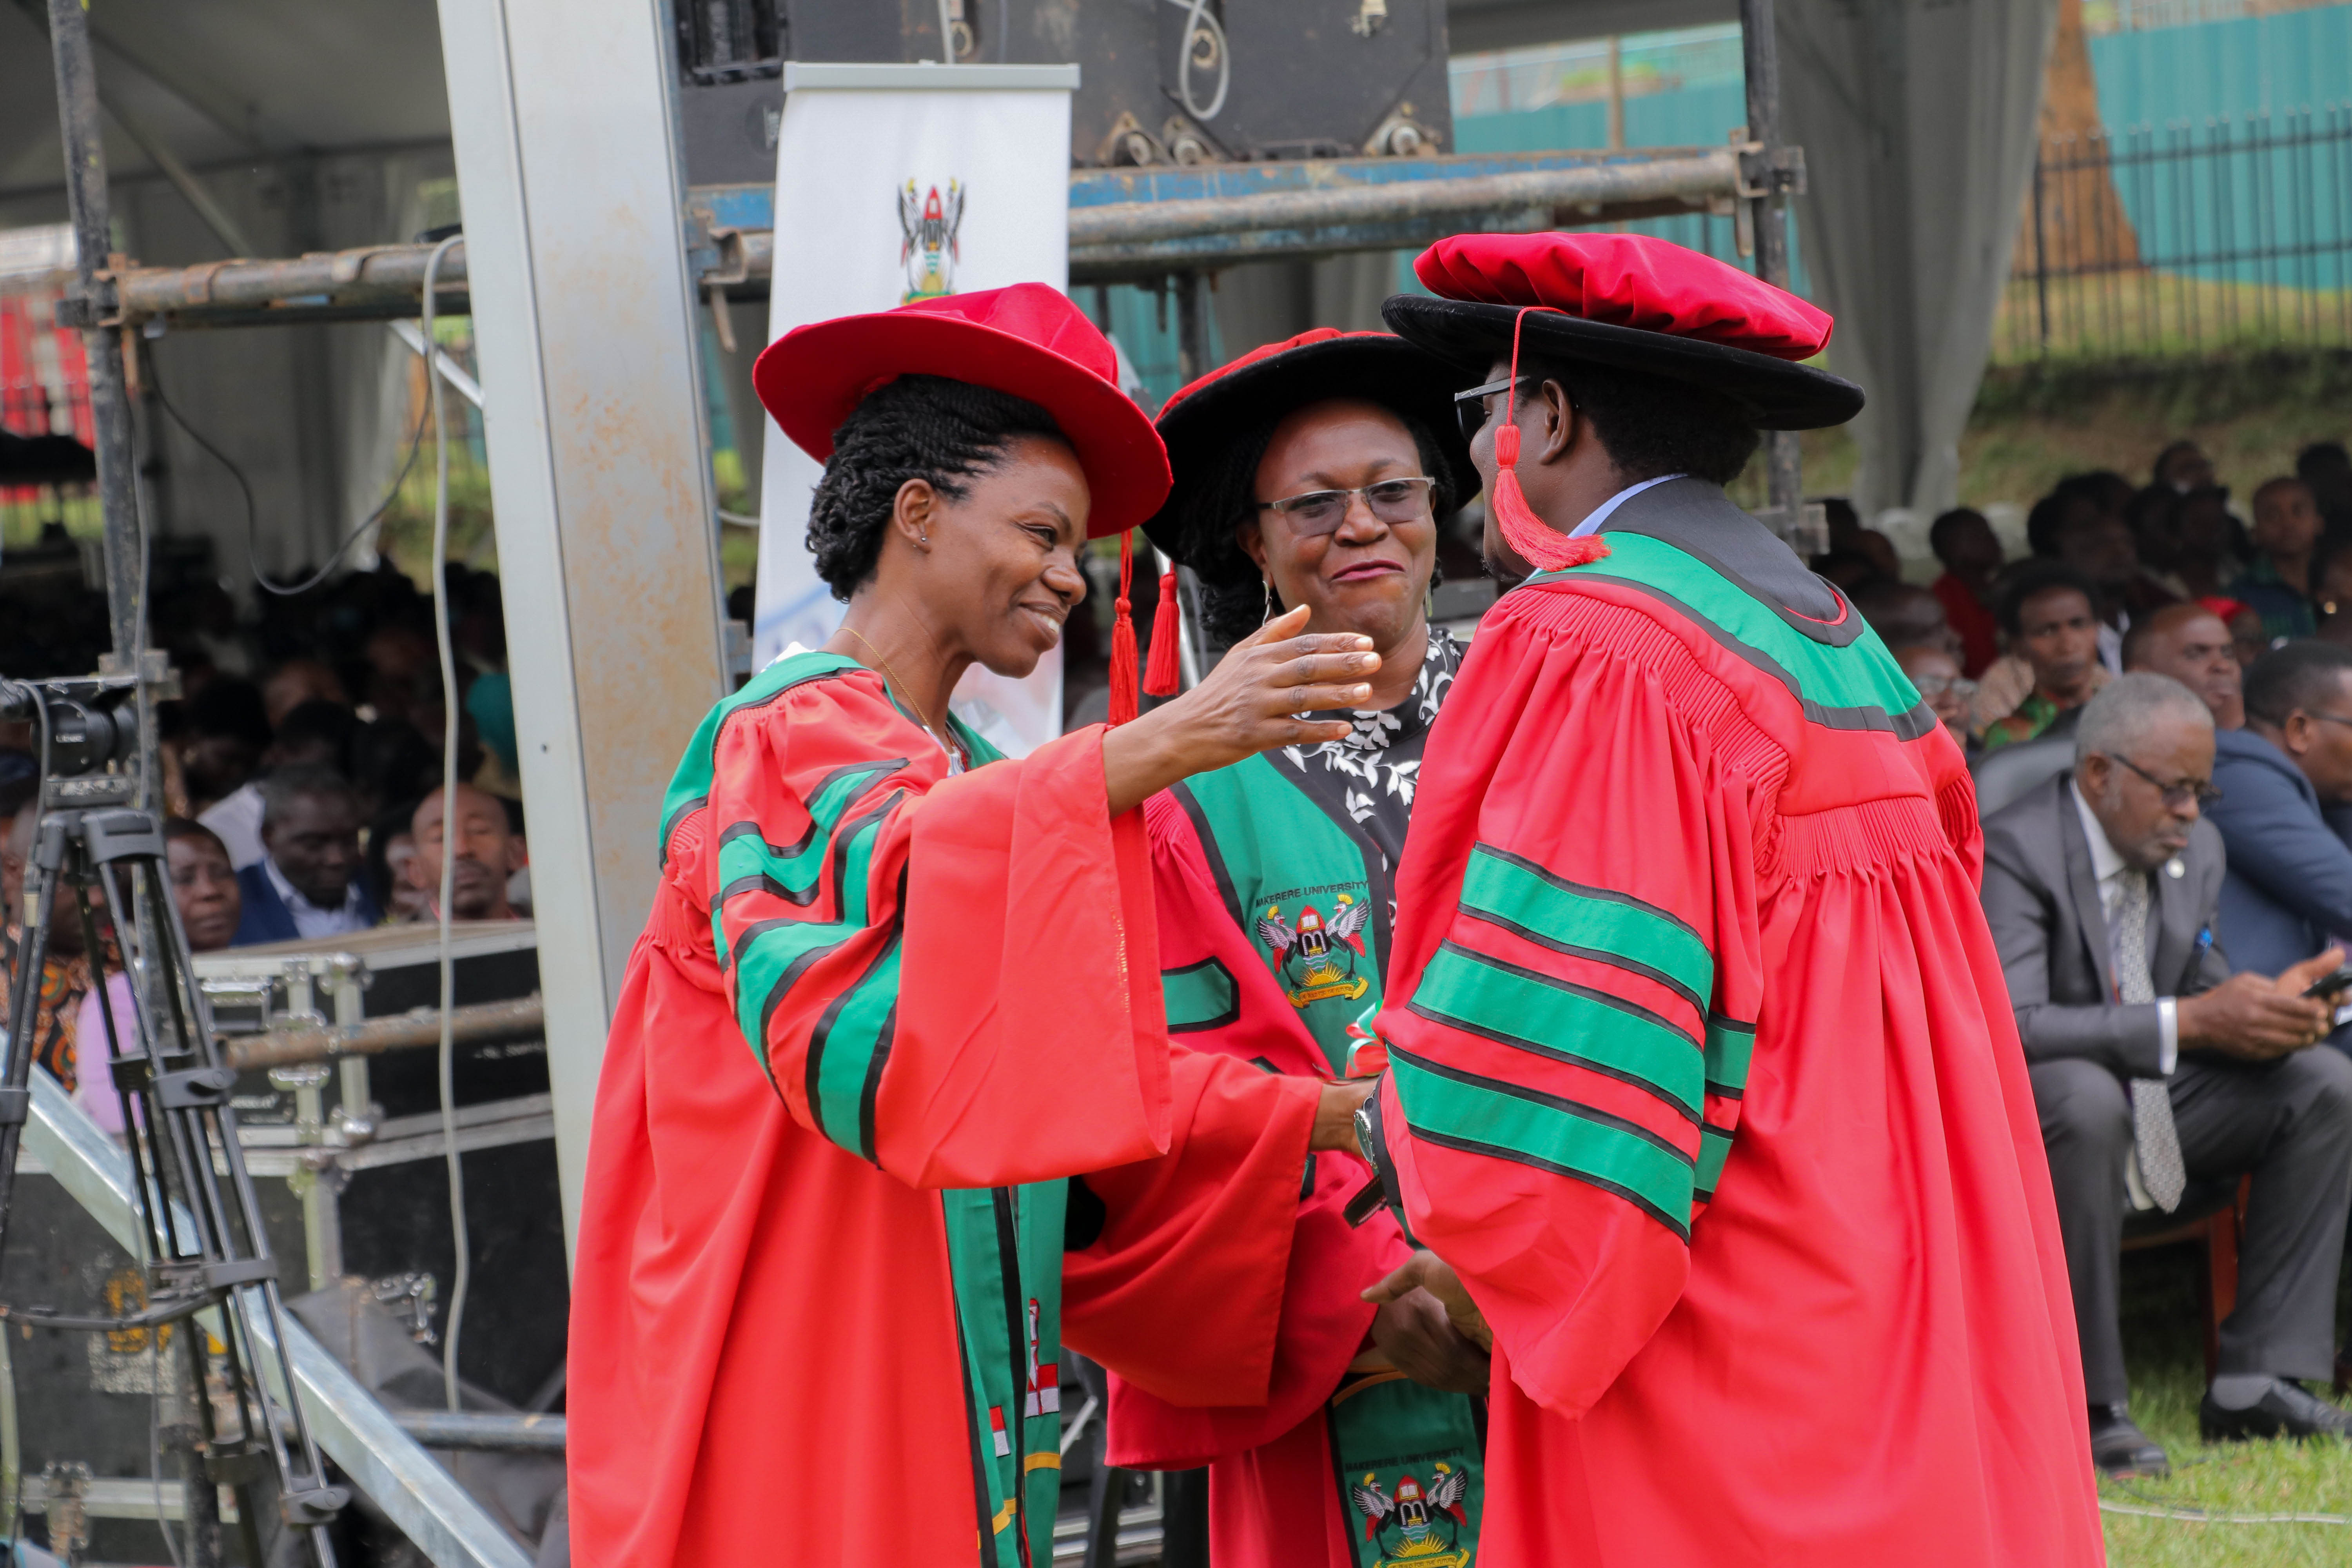 Dr. Esther Buregyeya. an Associate Professor and Chair of the Department of Disease Control and Environmental Health and Dr. Christine K. Nalwadda, Senior Lecturer and Head, Department of Community Health and Behavioral Sciences congratulate Muleme on his PhD